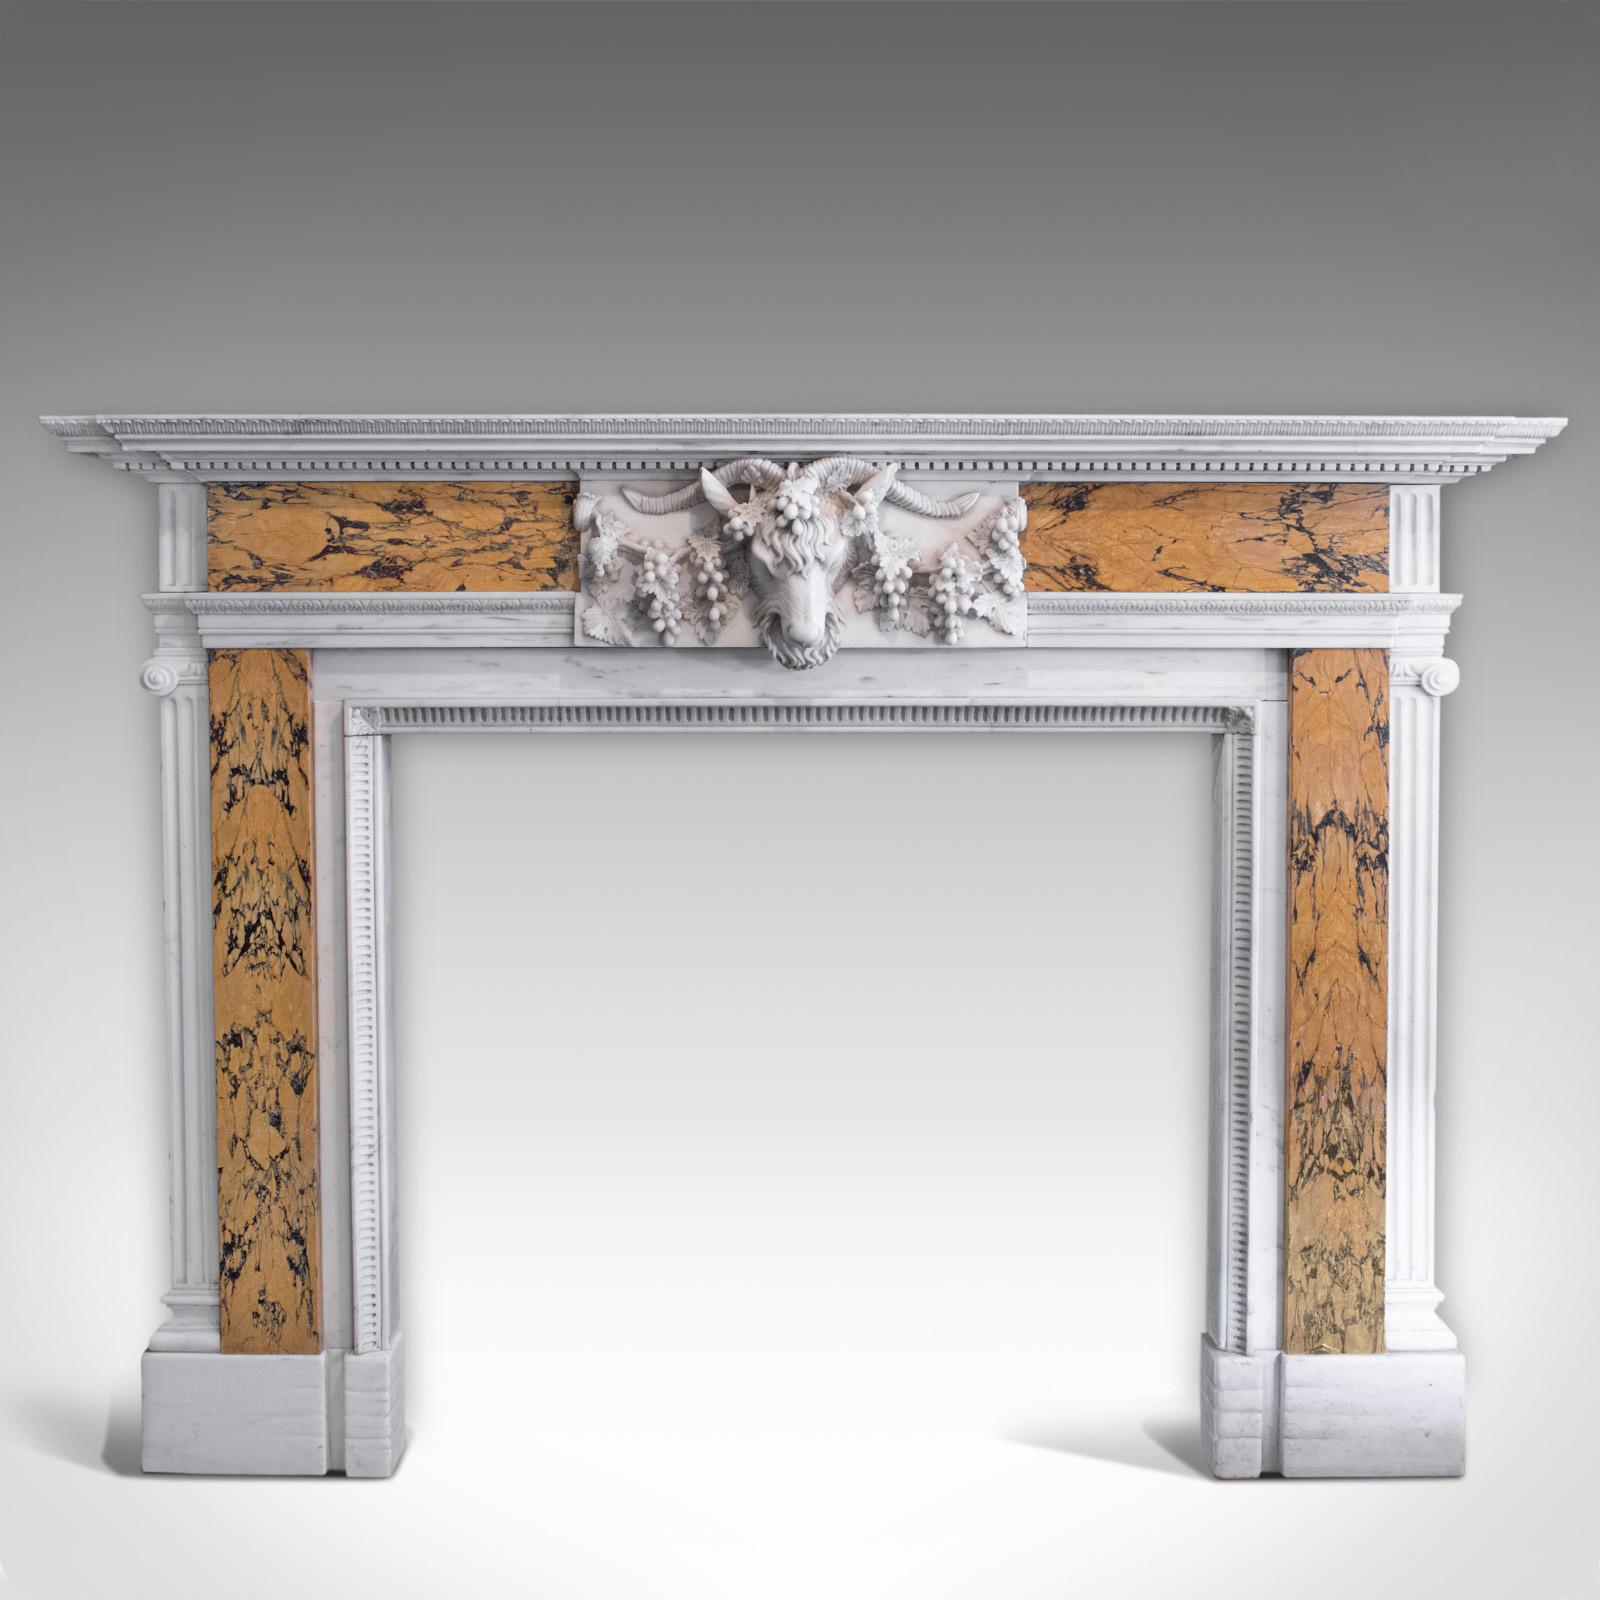 This is a Georgian revival marble fireplace. An English, fire surround with mantelpiece in the classical taste by Dominic Hurley, dating to the late 20th century, circa 1980.

A fireplace of exacting proportion displaying Palladian overtones
In